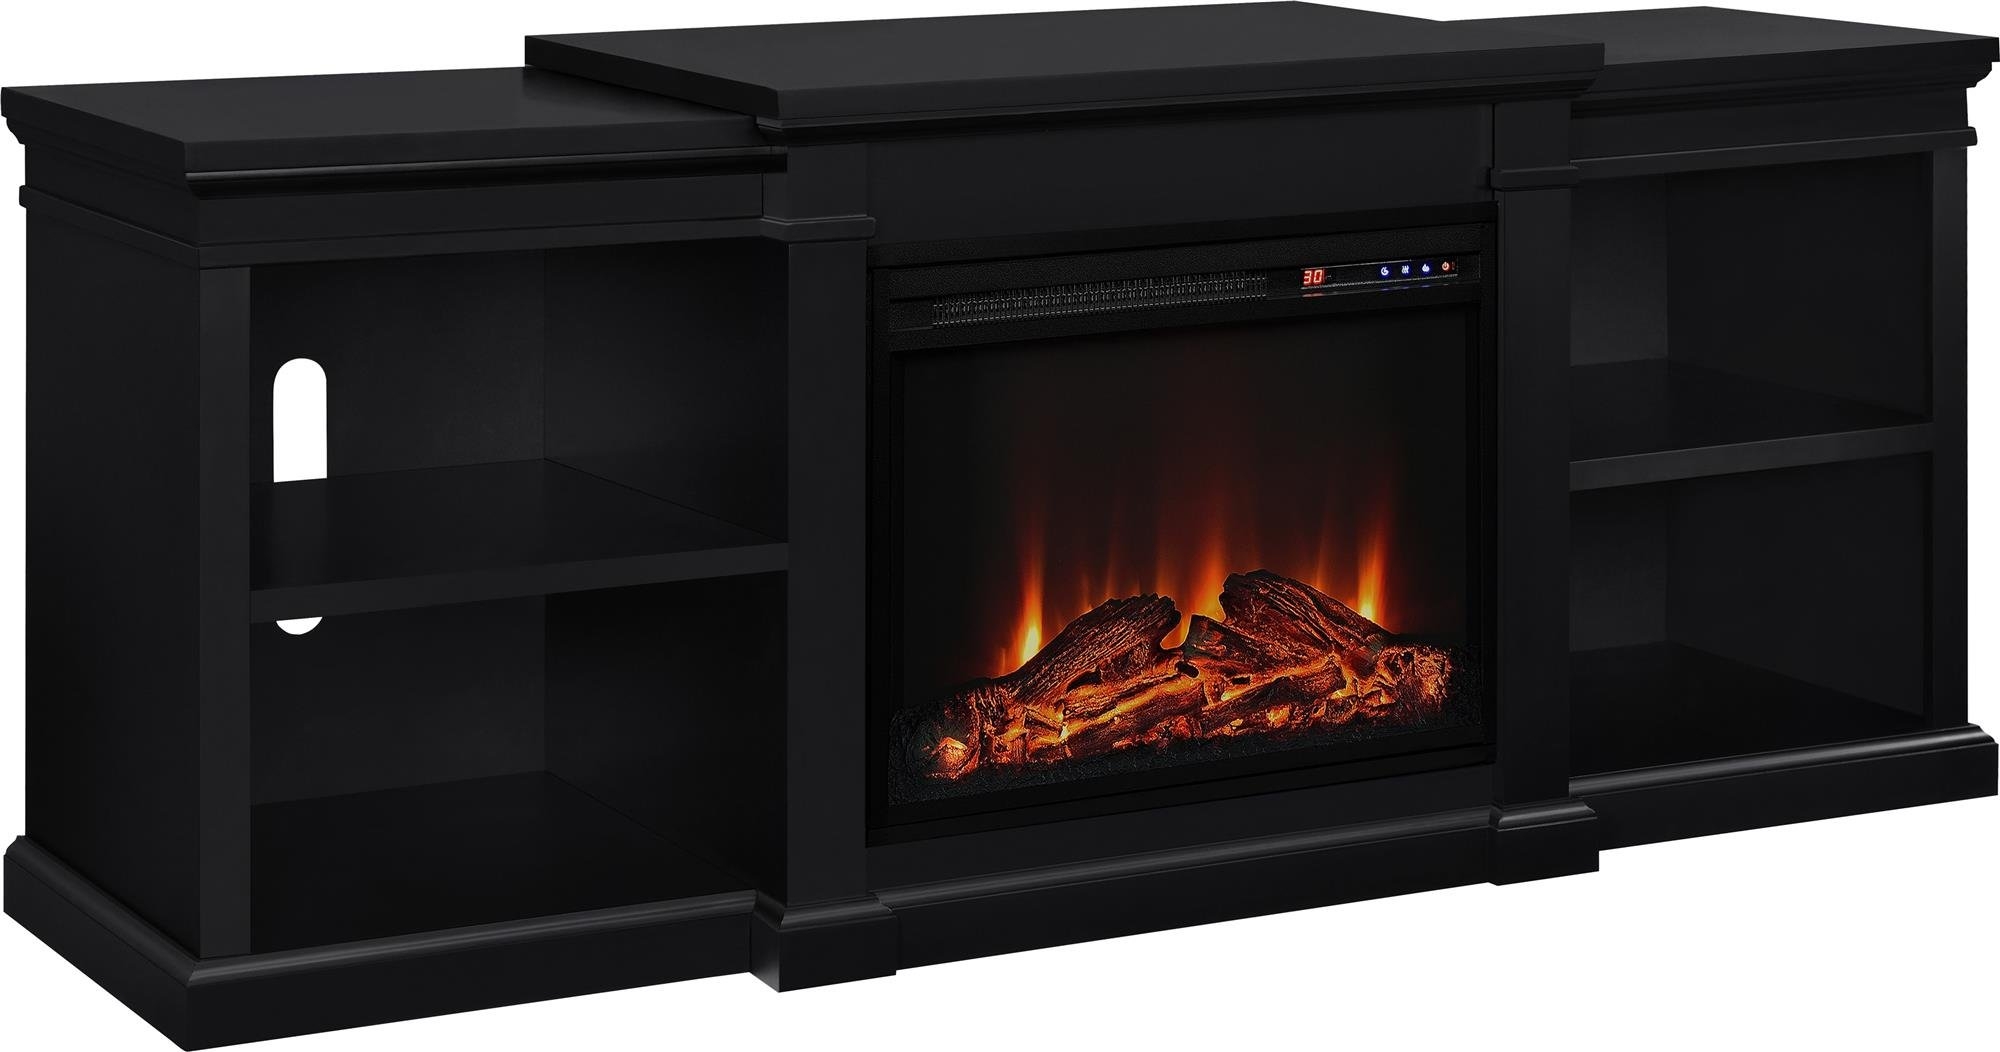 Electric fireplace tv stands fireplaces home living room